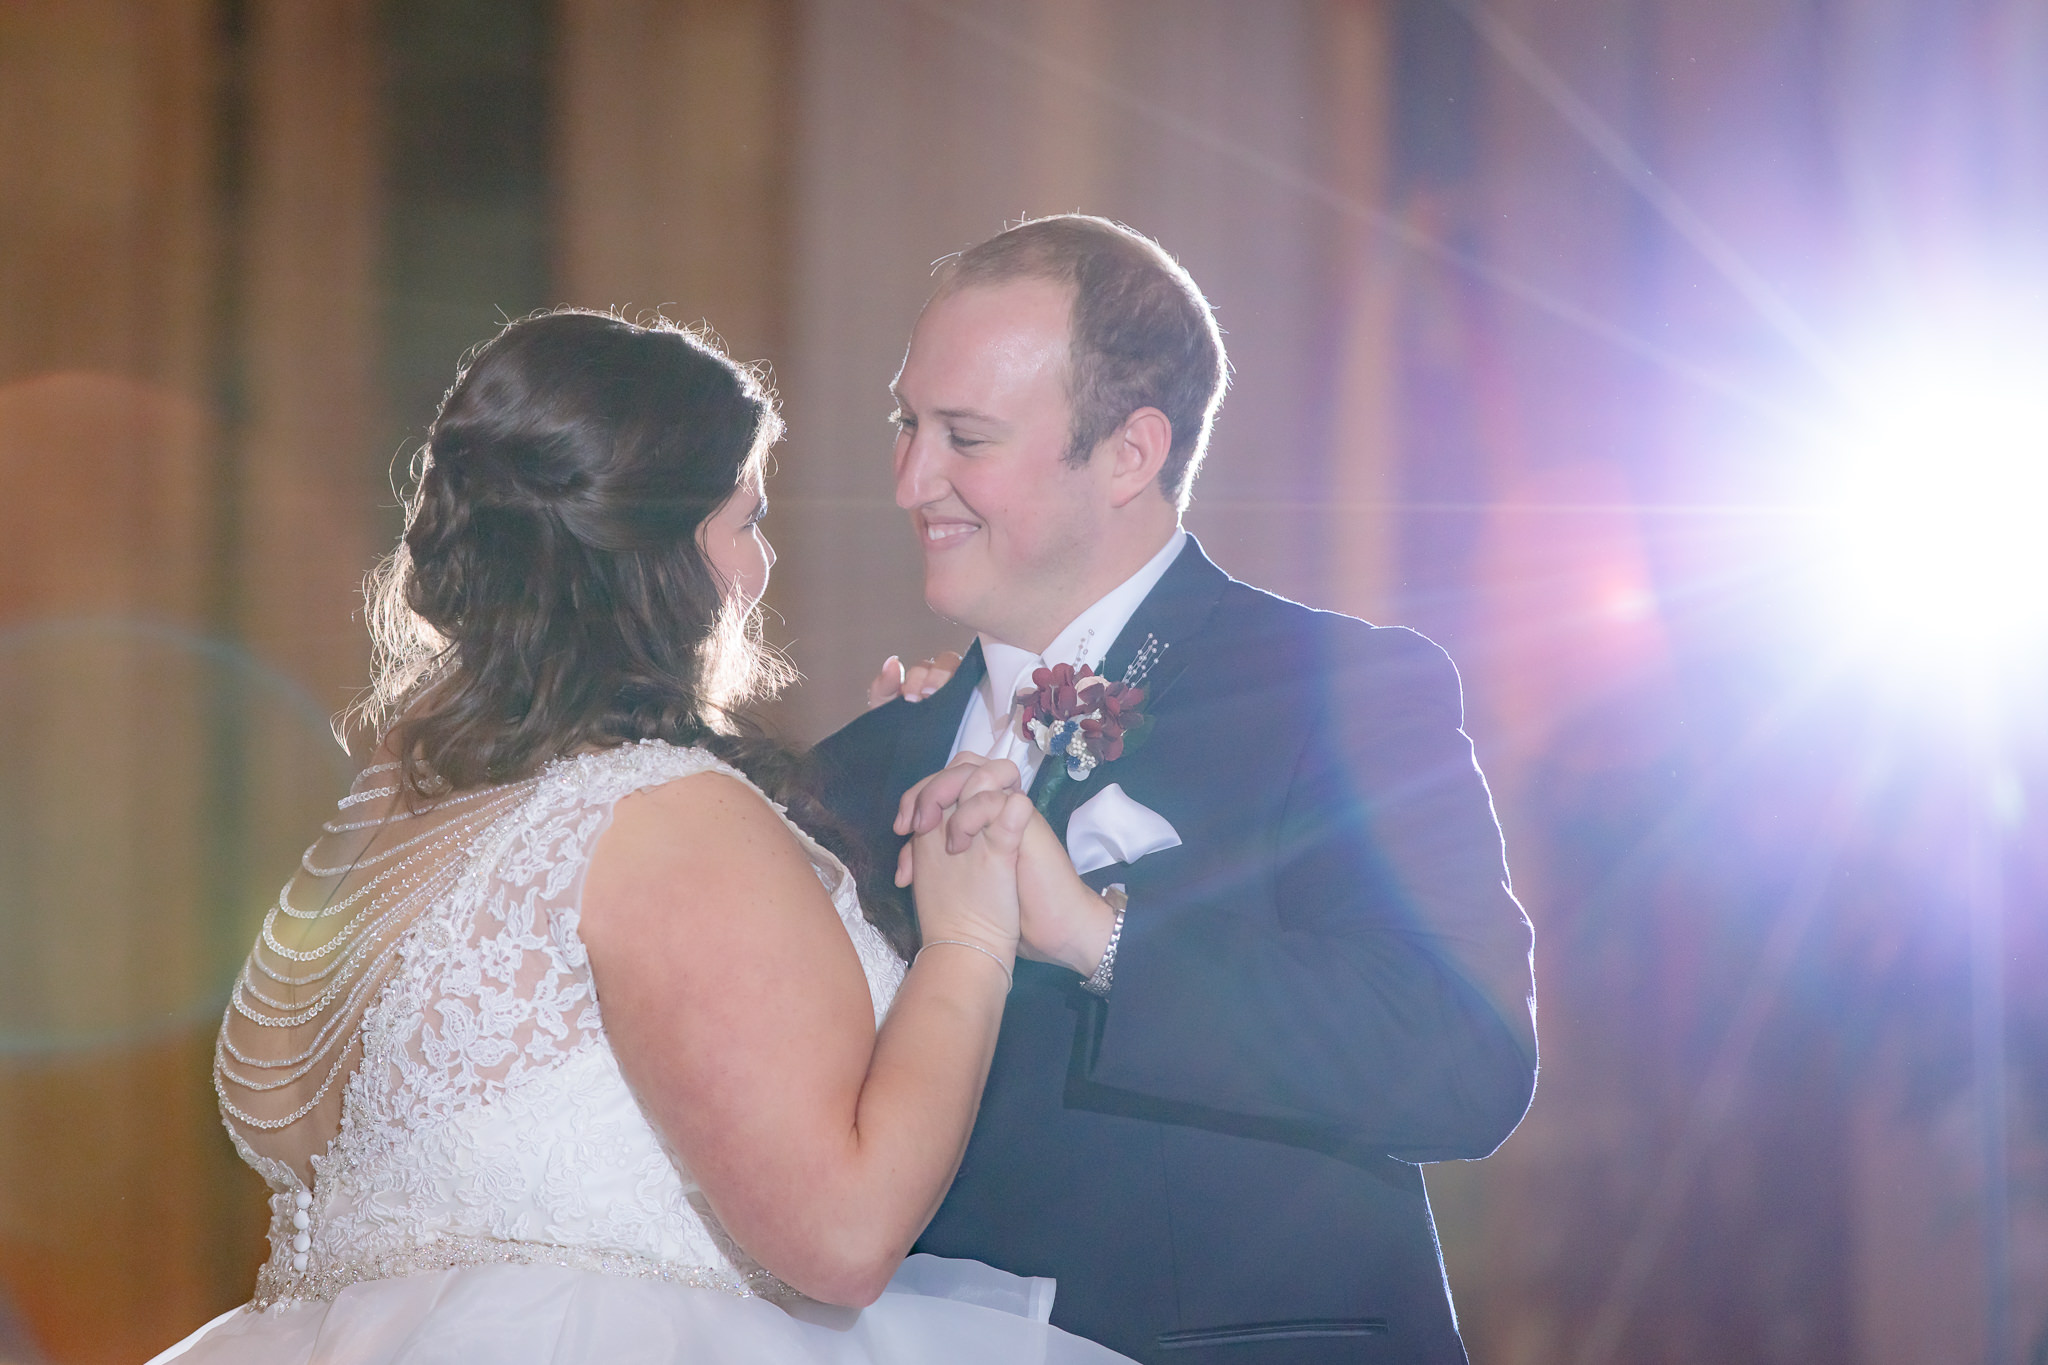 The bride and groom's first dance at the Pennsylvanian wedding reception